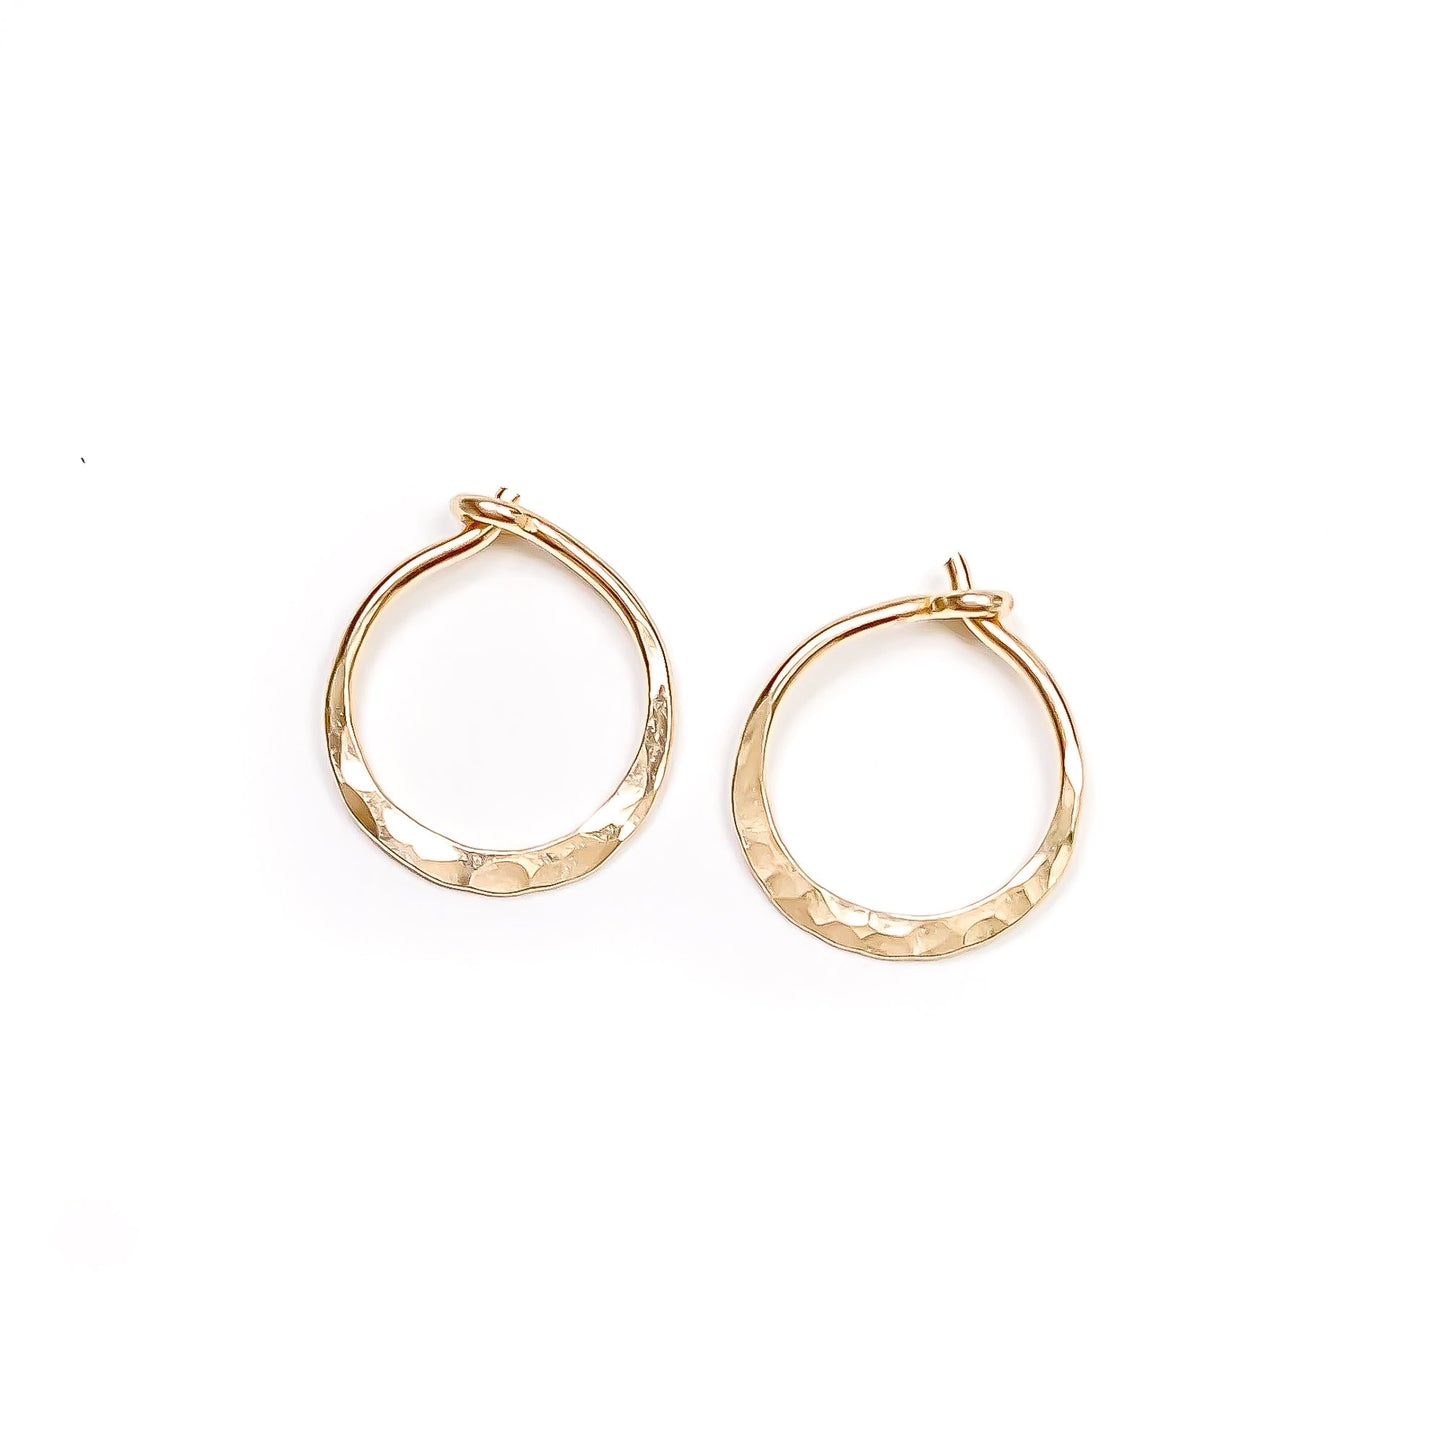 Hammered Small Hoops, 10mm